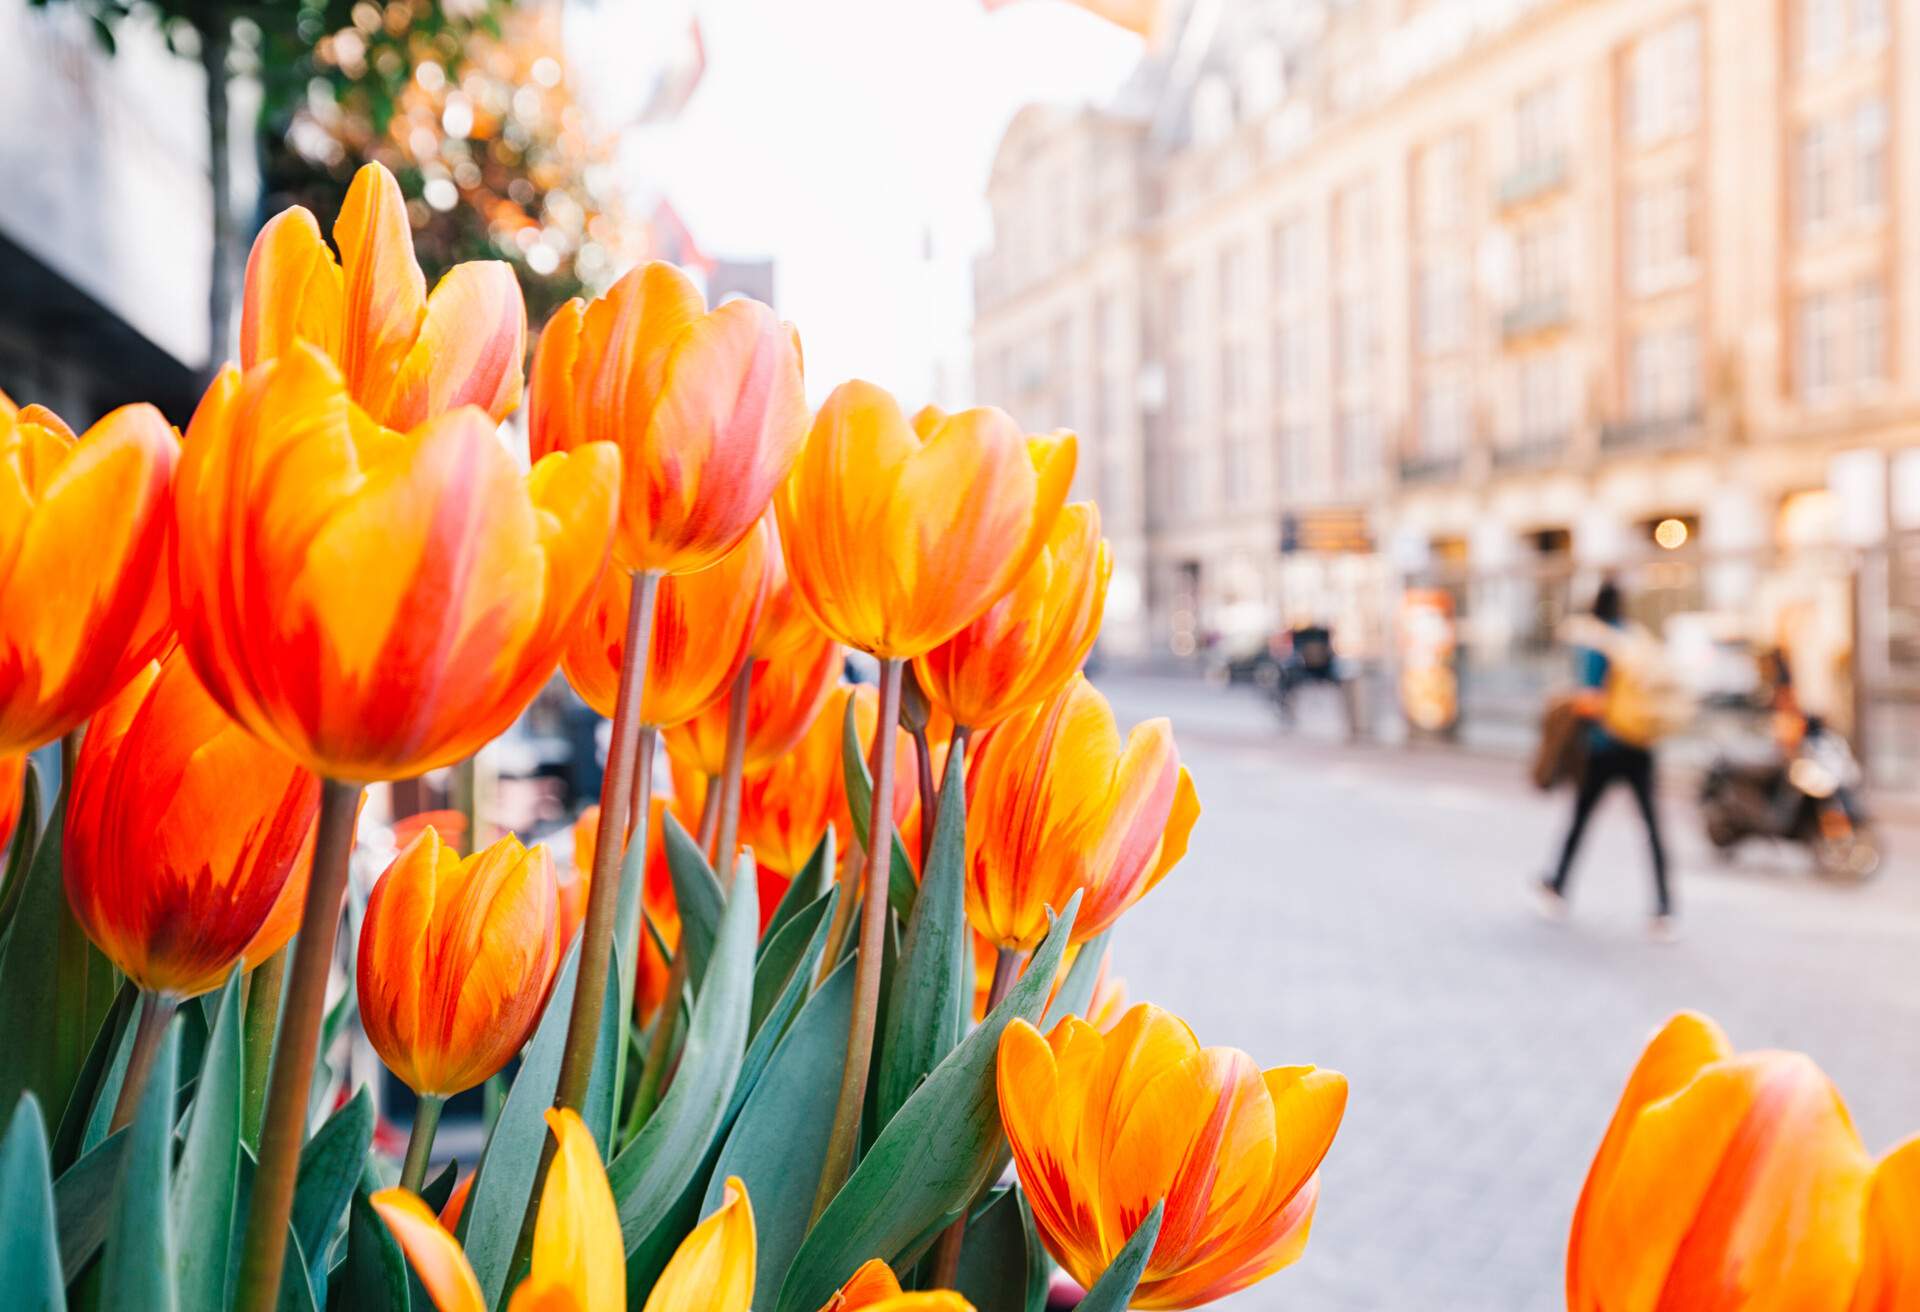 DEST_NETHERLANDS_AMSTERDAM_THEME_SPRING_TULIPS_GettyImages-638641960